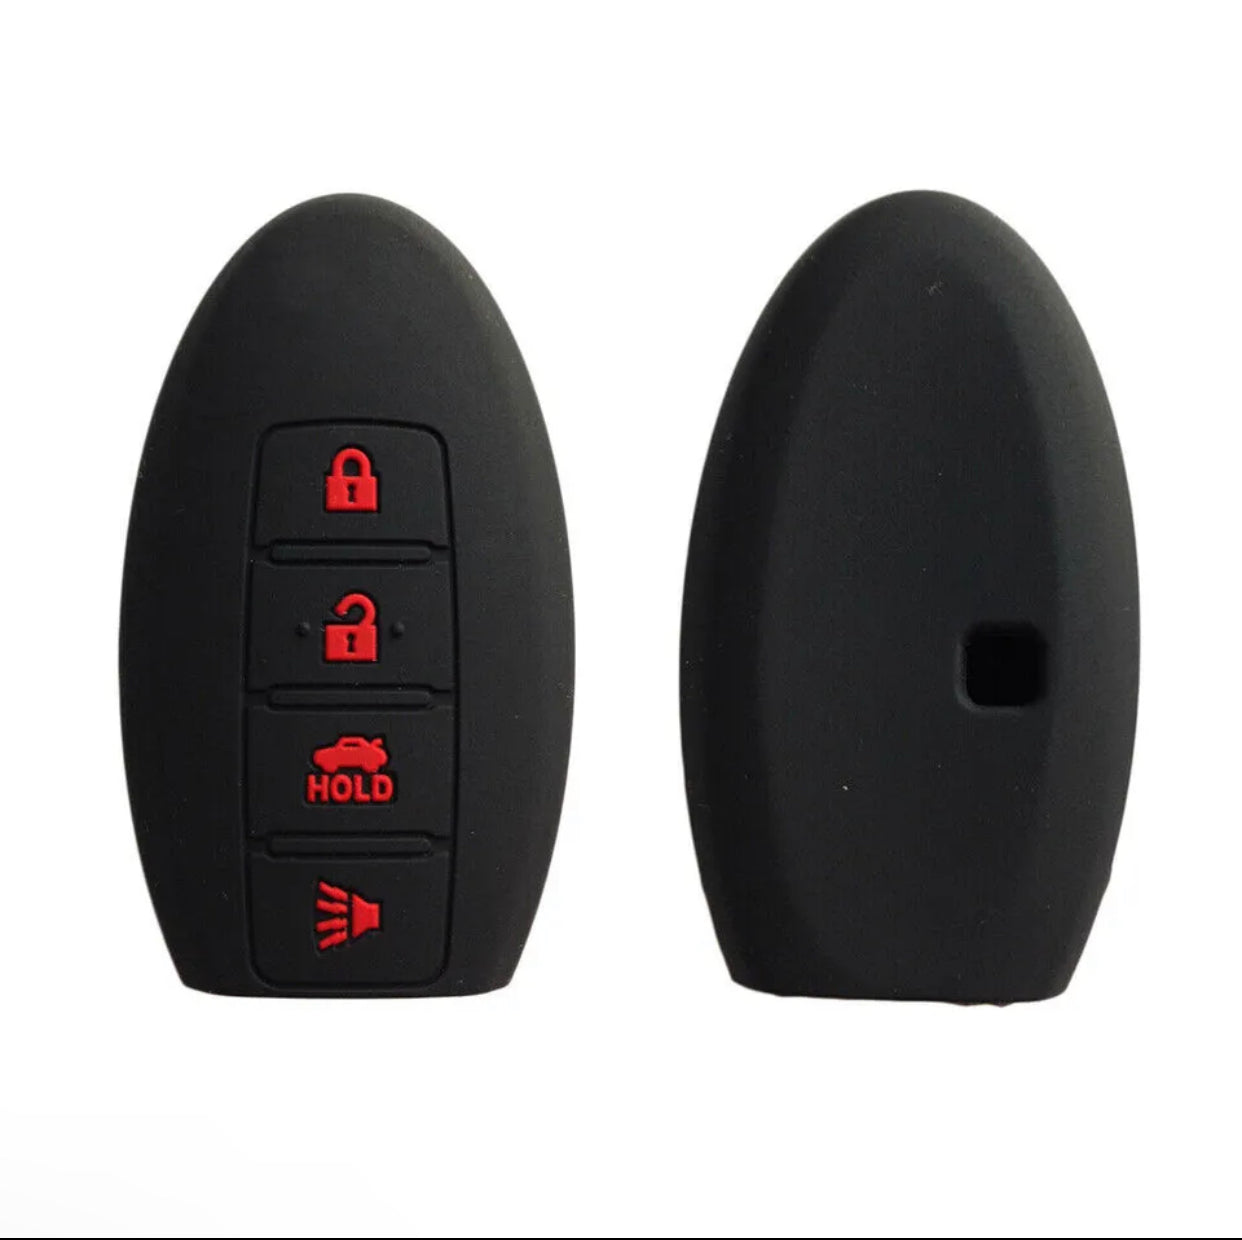 Silicone Soft Remote Car Key Fob Cover Case Shell Holder For Infiniti G35 G37